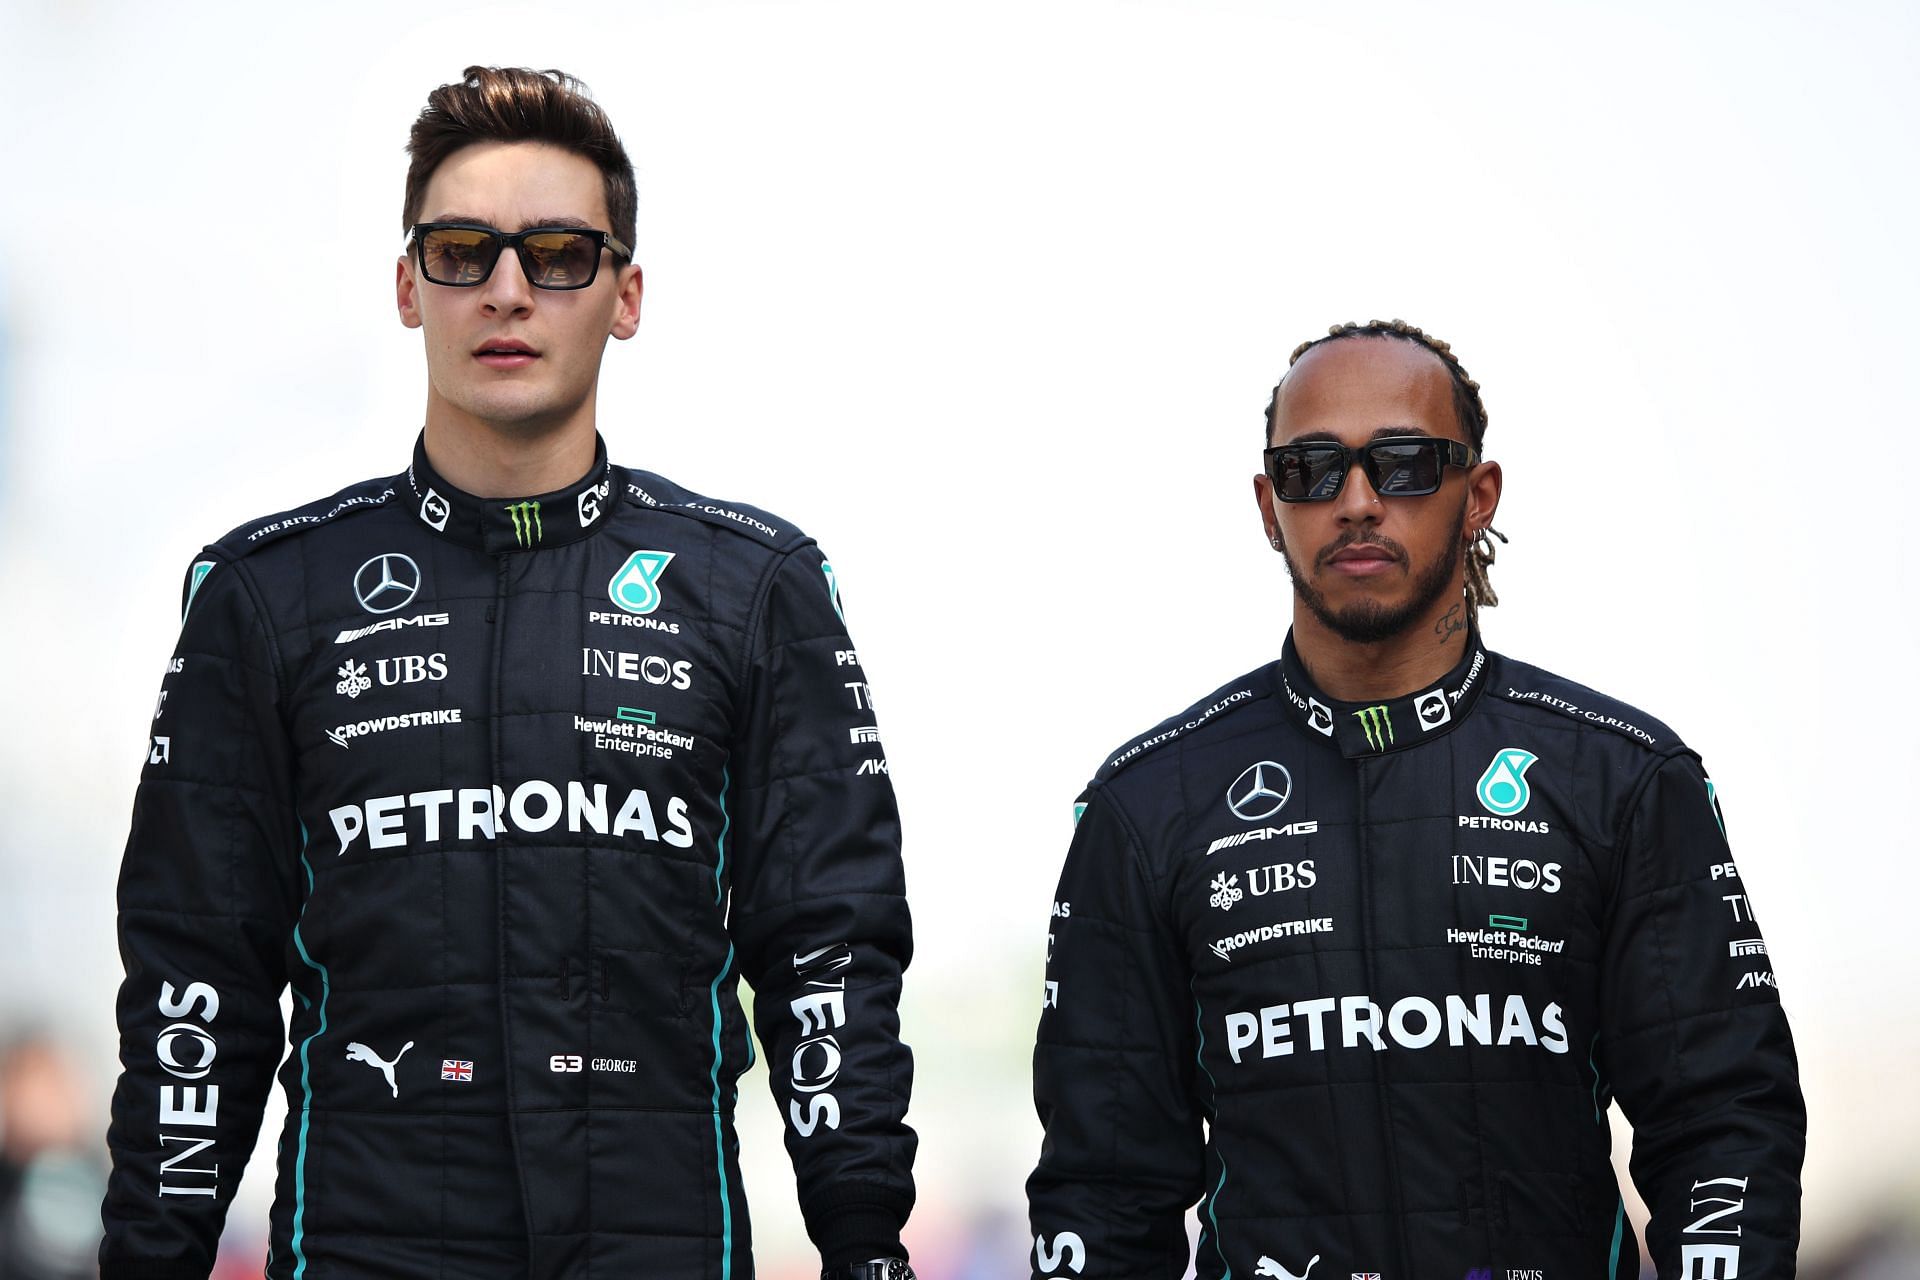 George Russell (left) and Lewis Hamilton (right) at the start of the 2022 F1 season in Bahrain. (Photo by Mark Thompson/Getty Images)